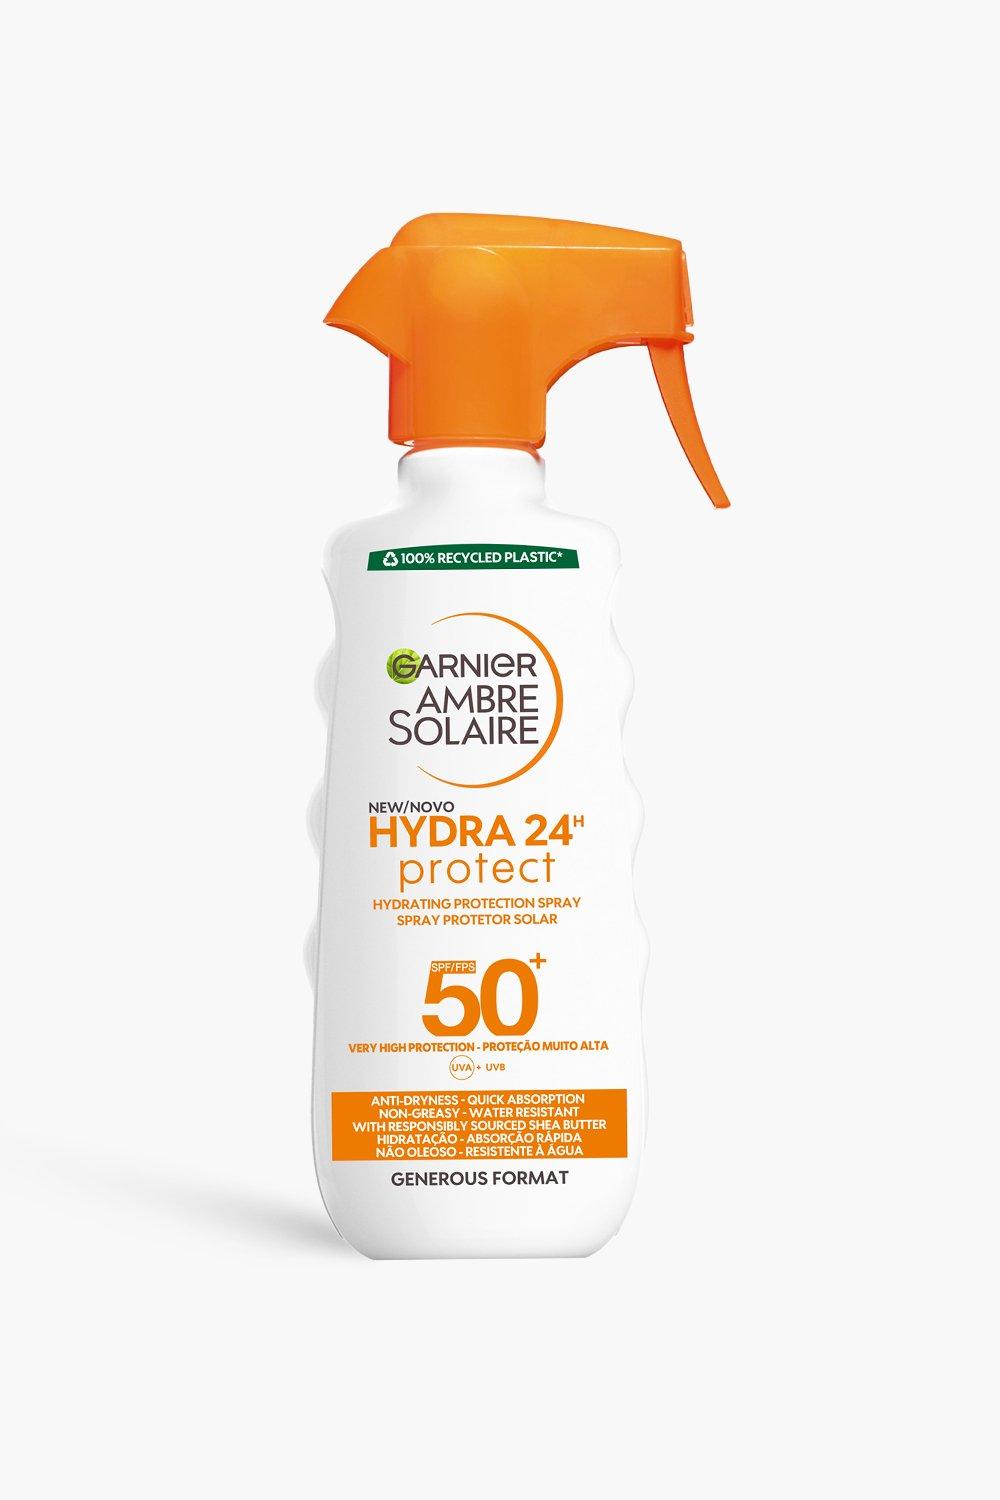 Garnier Ambre Solaire Hydra 24 Hour Protect Hydrating Protection Spray Spf50, Uva & Uvb Protection, 300Ml (Bespaar 31%), White